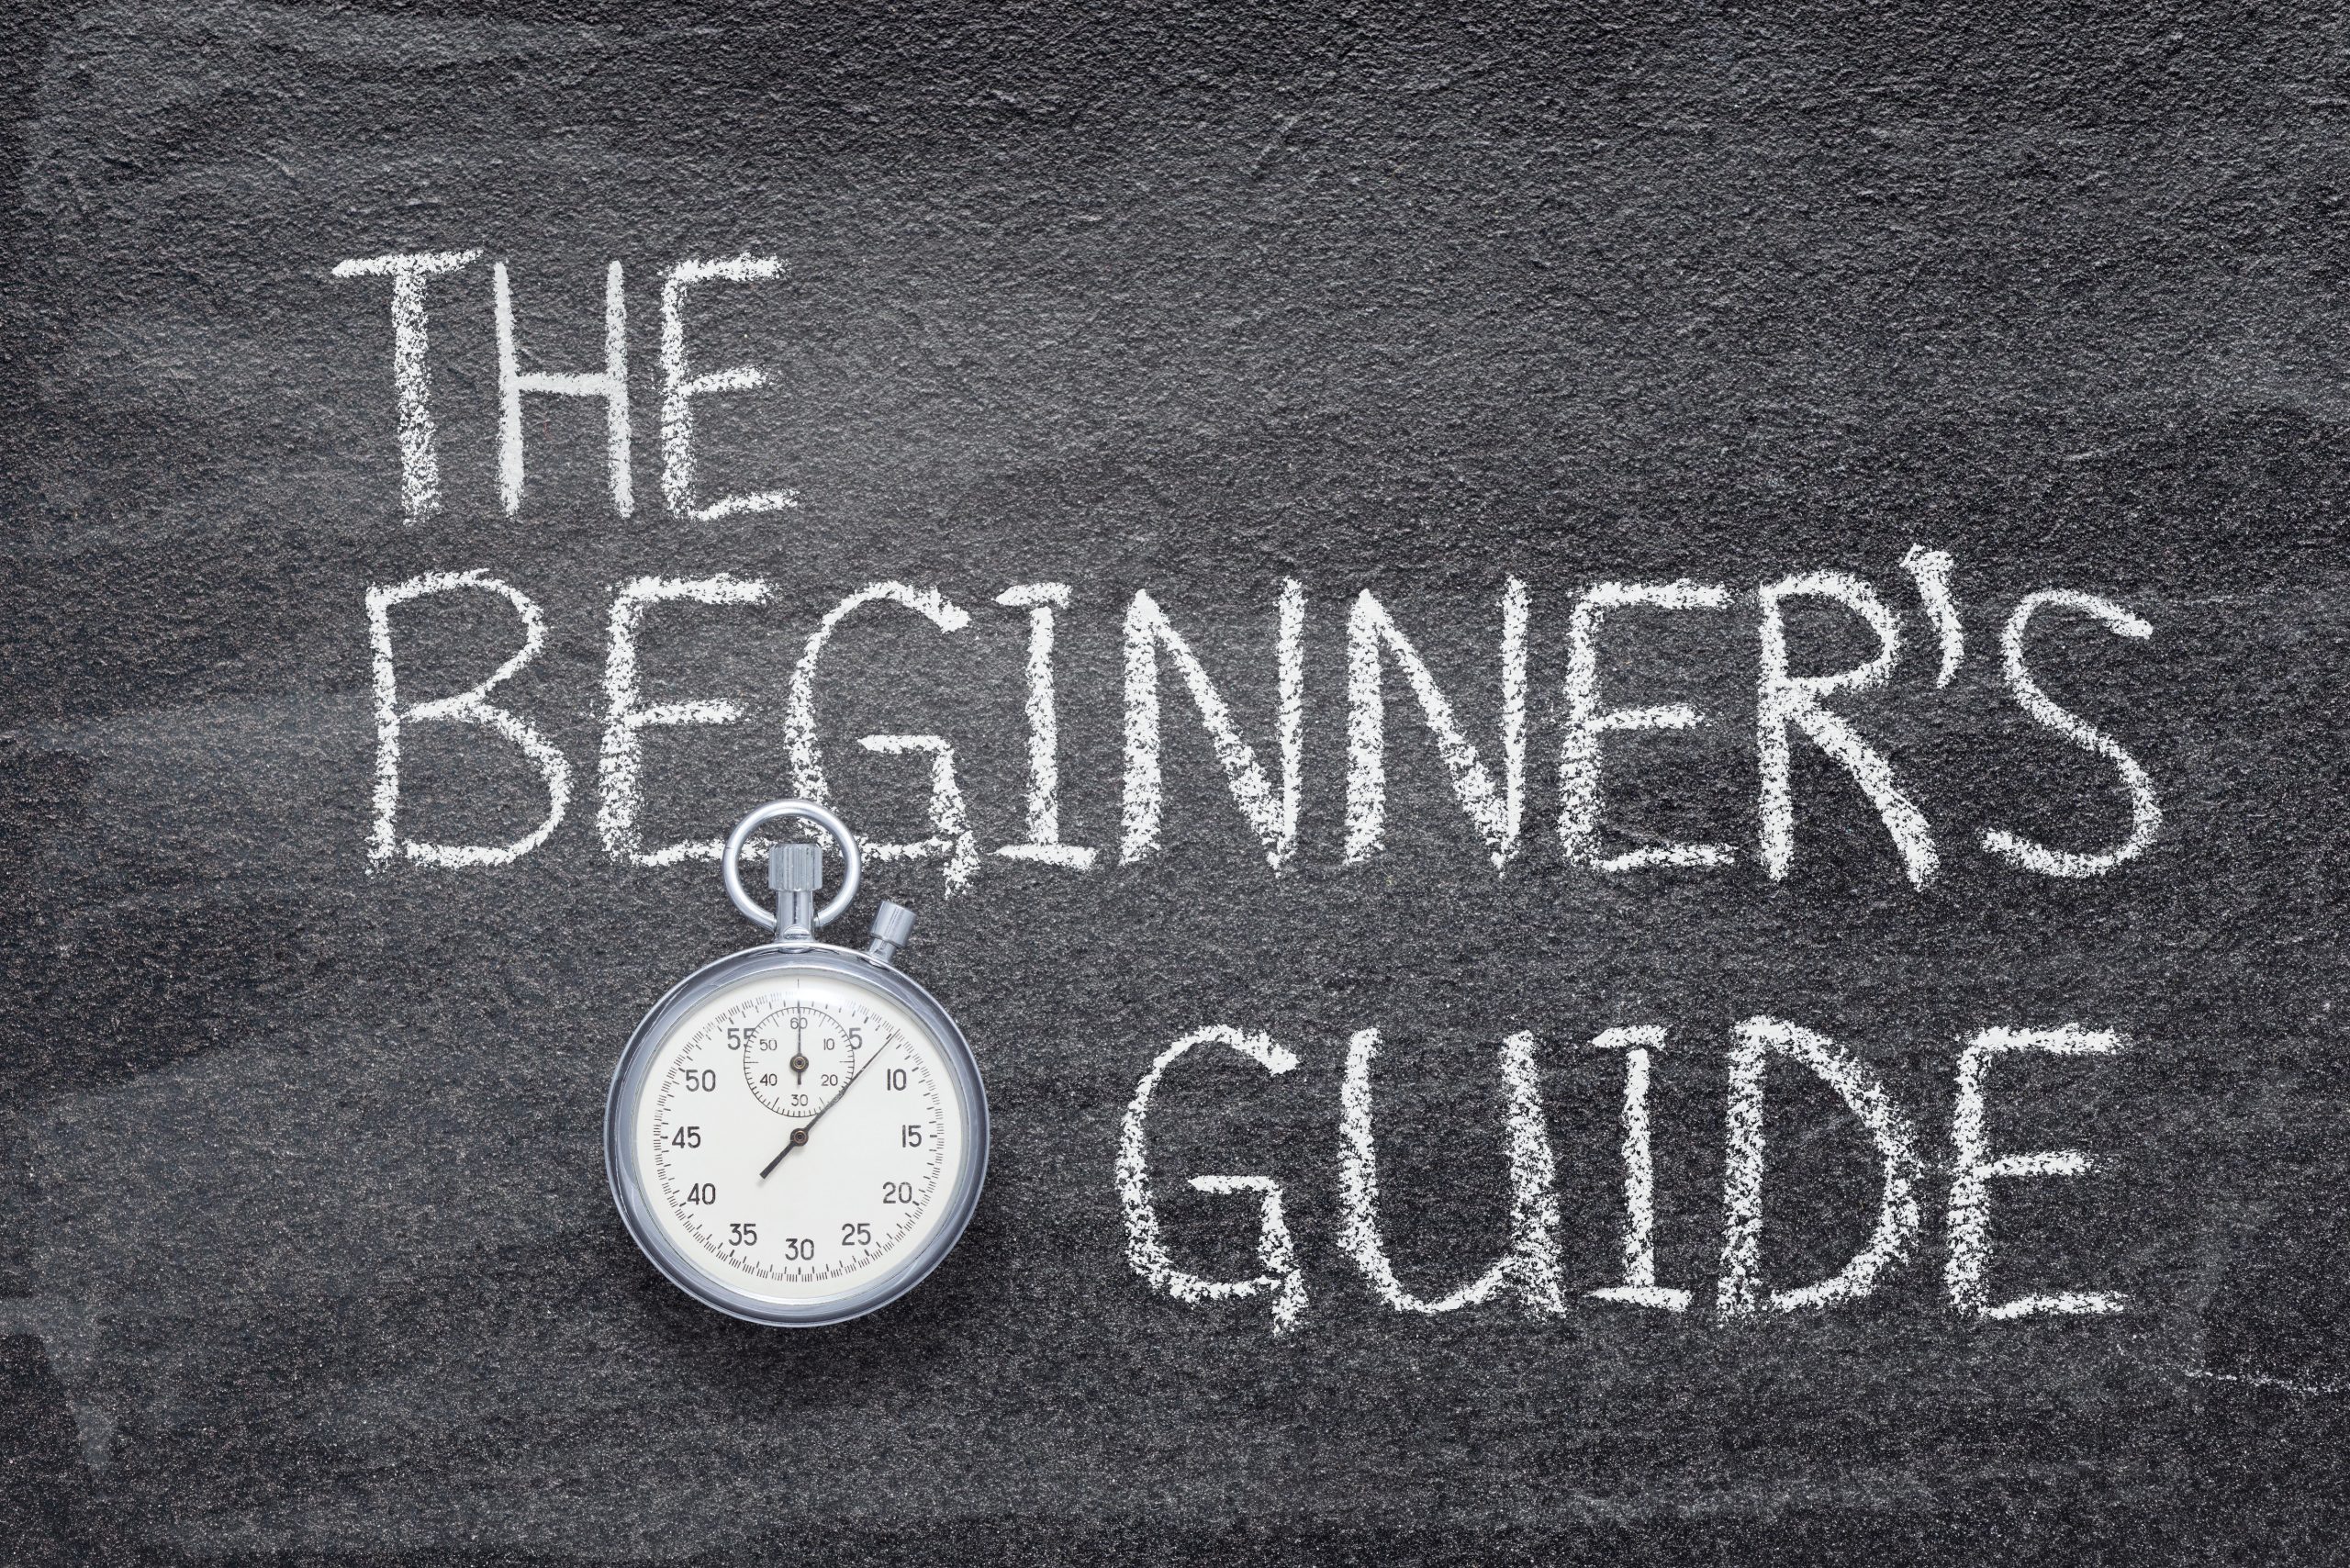 Featured Image depicting a chalkboard that says "Kratom Beginner's Guide"; A Pocketwatch sits on the chalkboard.